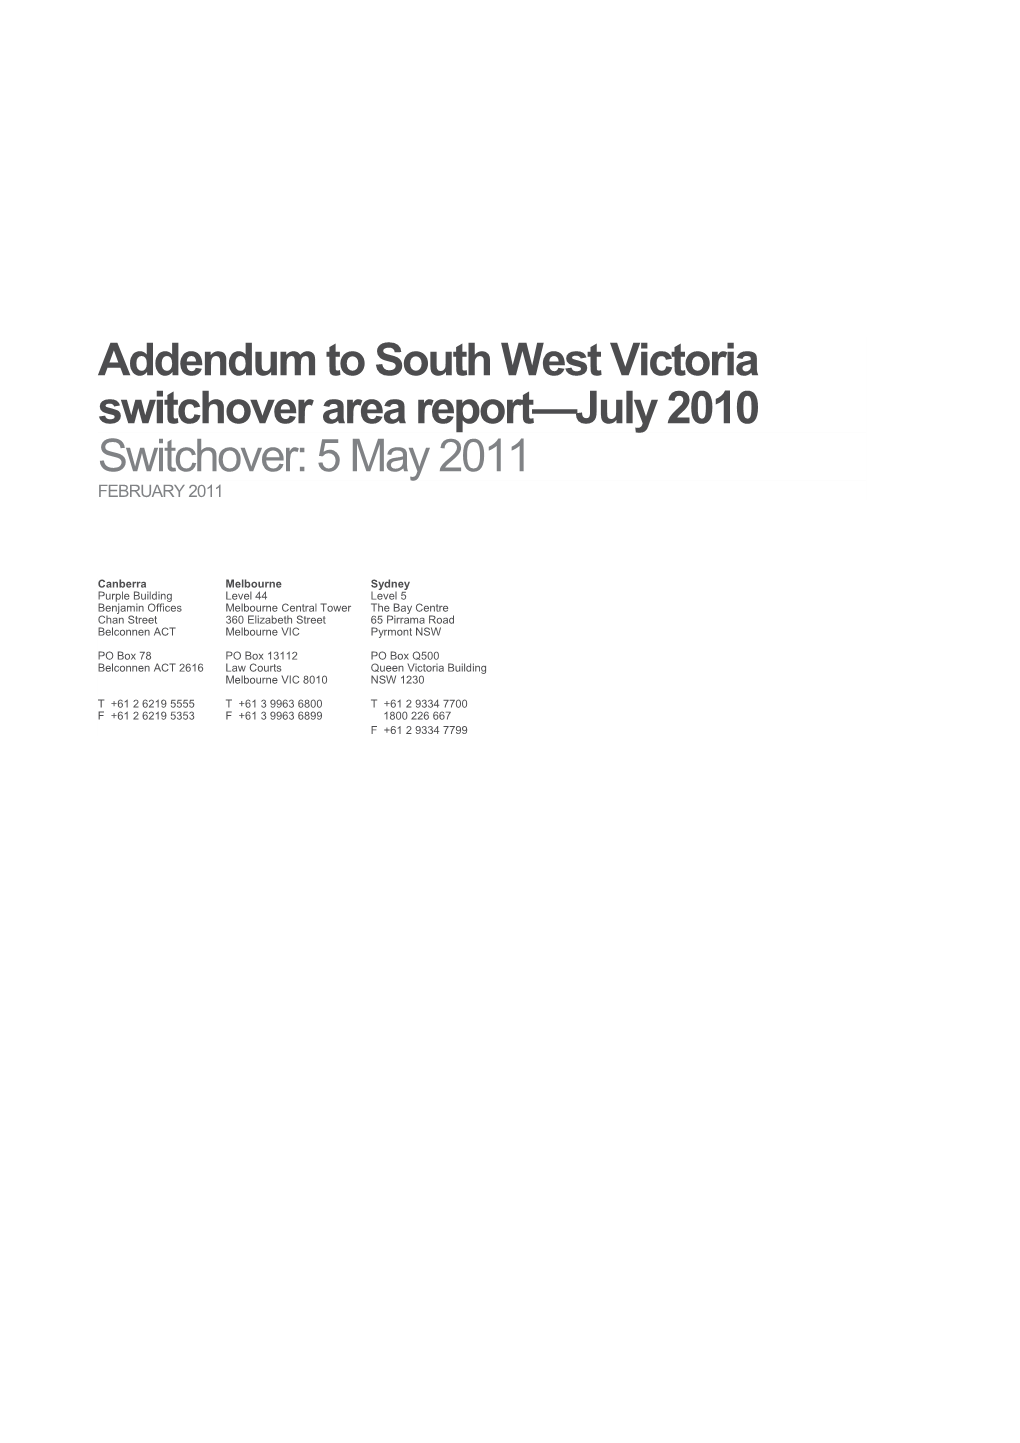 Addendum to South West Victoria Switchover Area Report July 2010